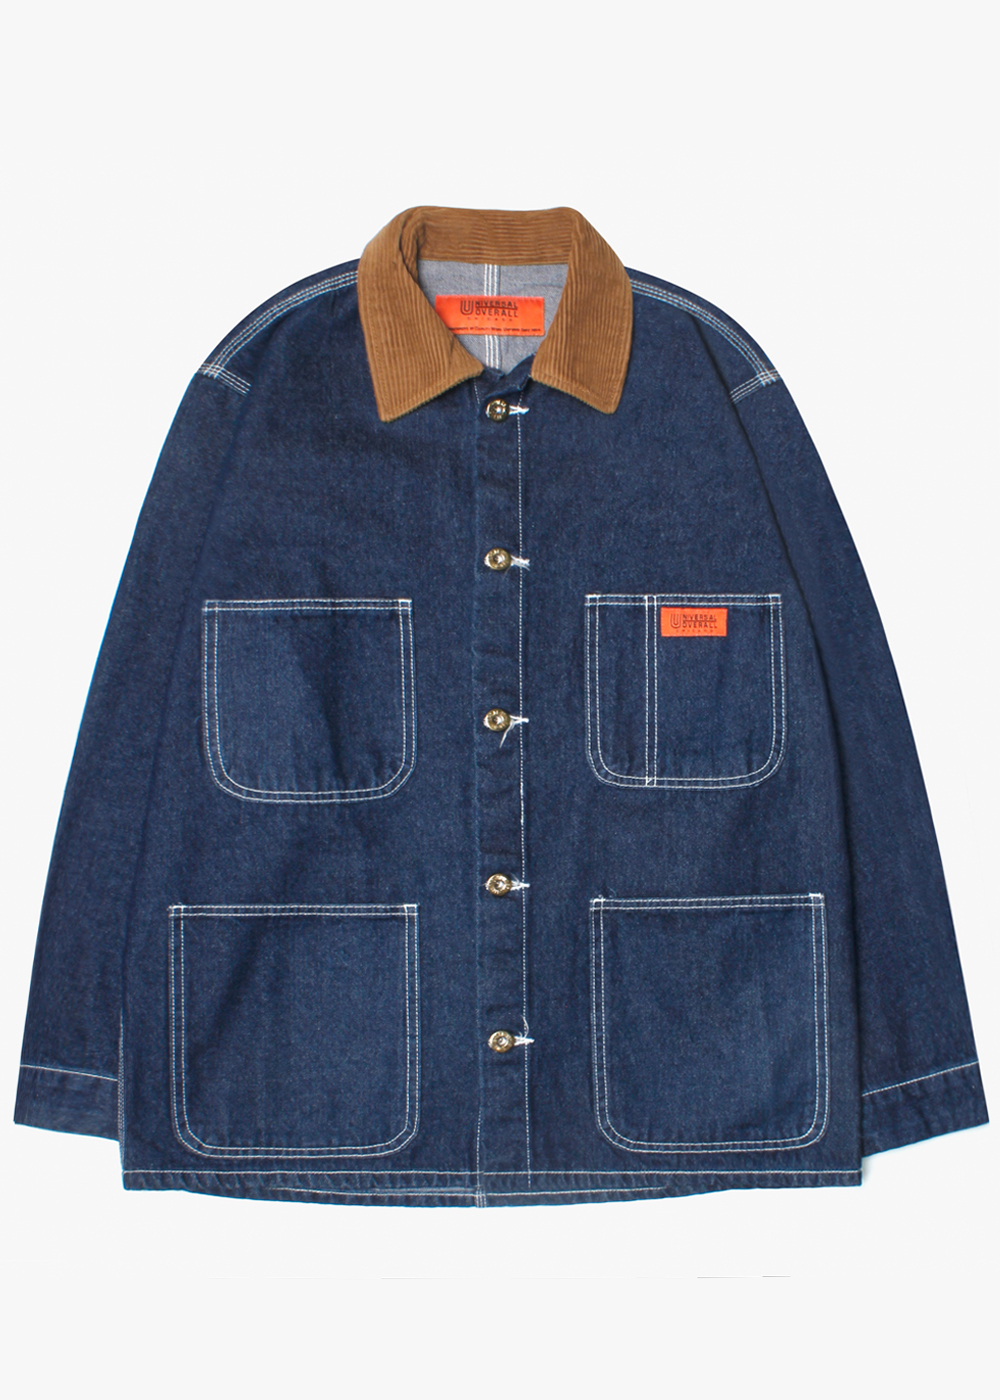 UNIVERSAL OVERALLcorduroy patchwork coverall